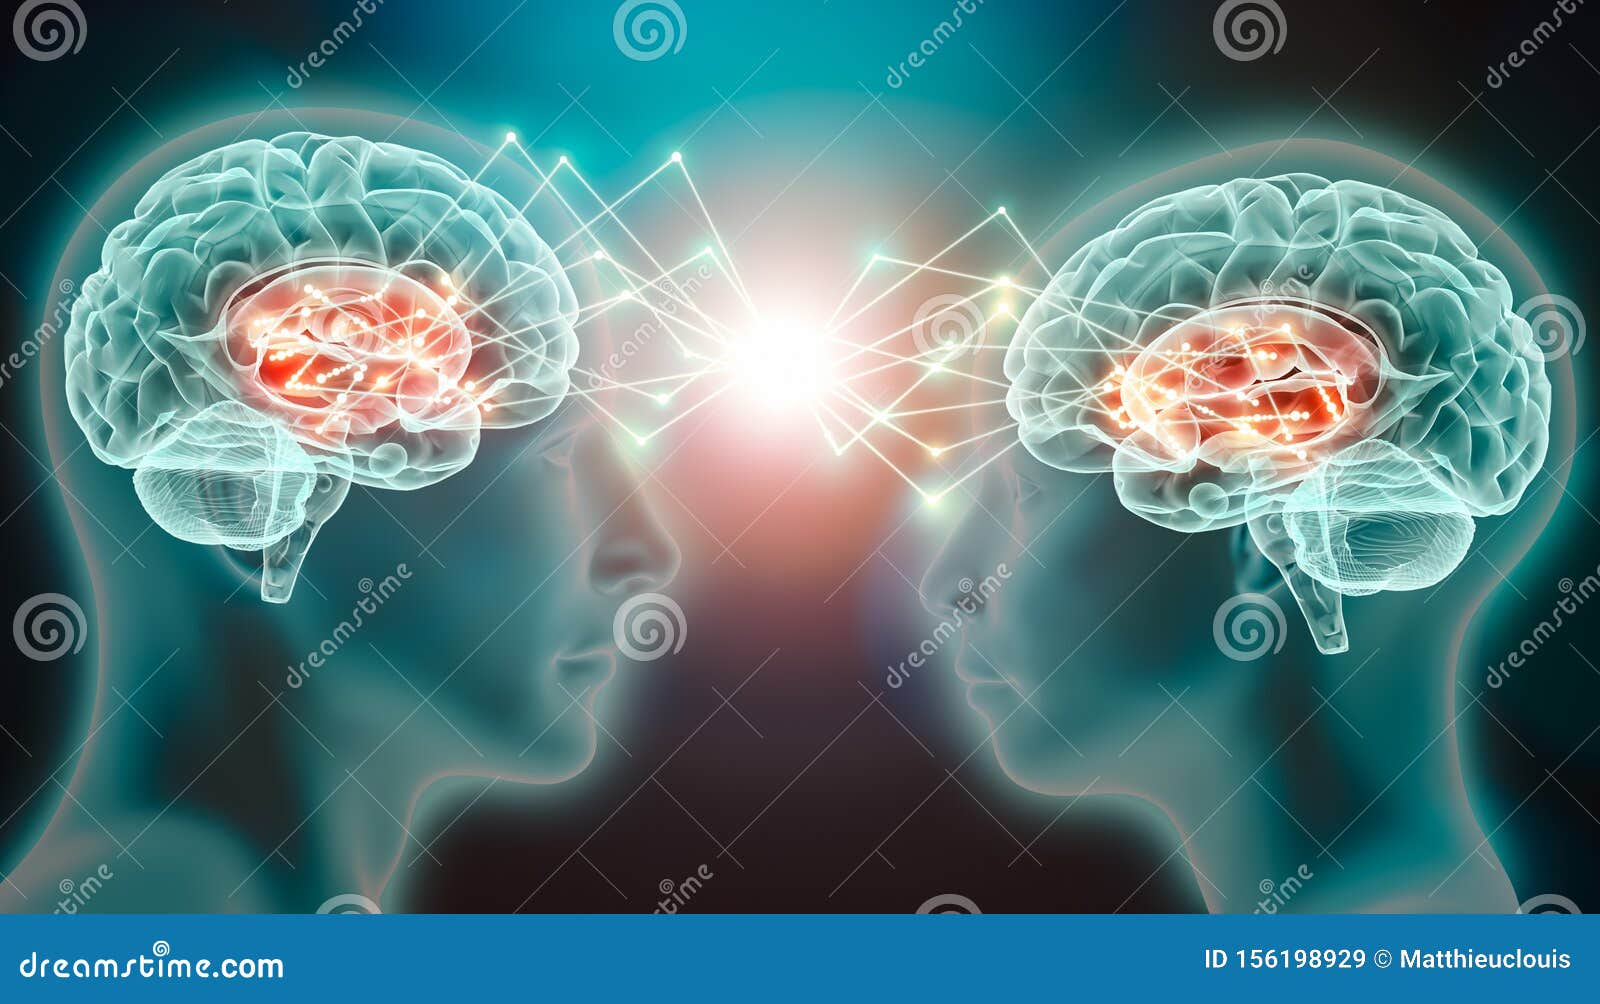 love emotion or empathy cerebral activity in caudate nucleus. human brains connected with plexus lines. conceptual  of